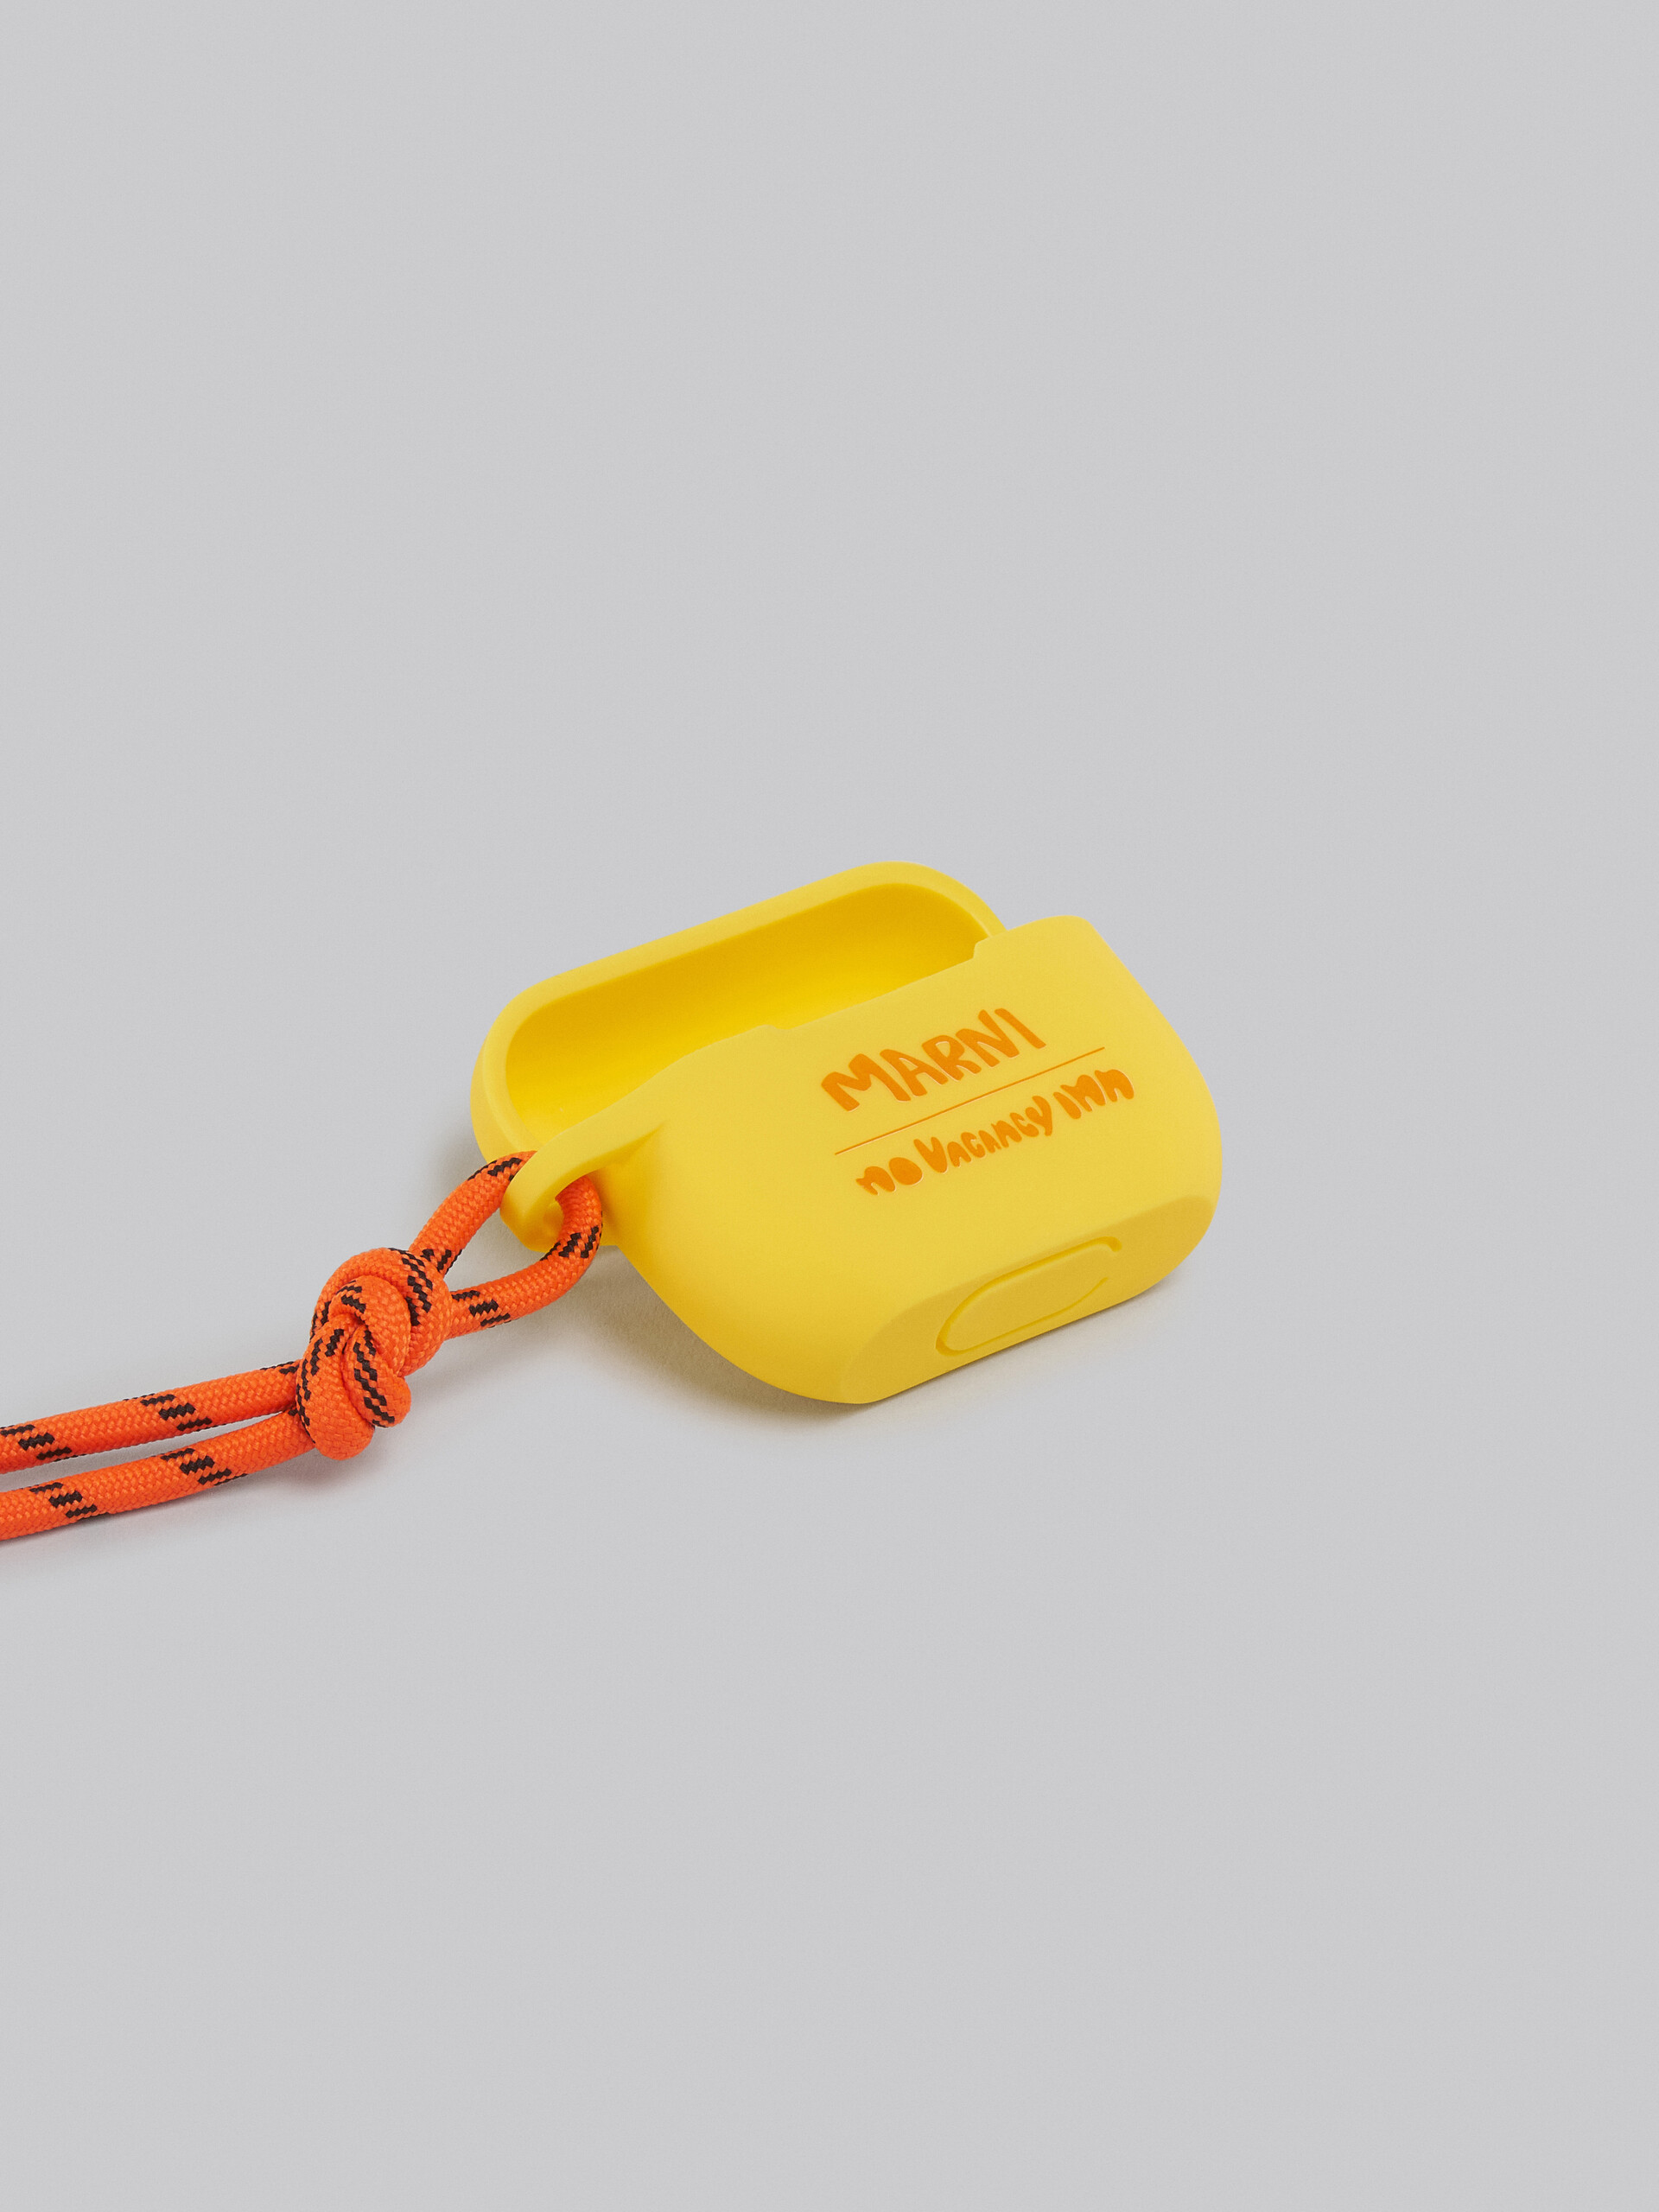 Marni x No Vacancy Inn - Yellow and orange Airpods case - Other accessories - Image 4